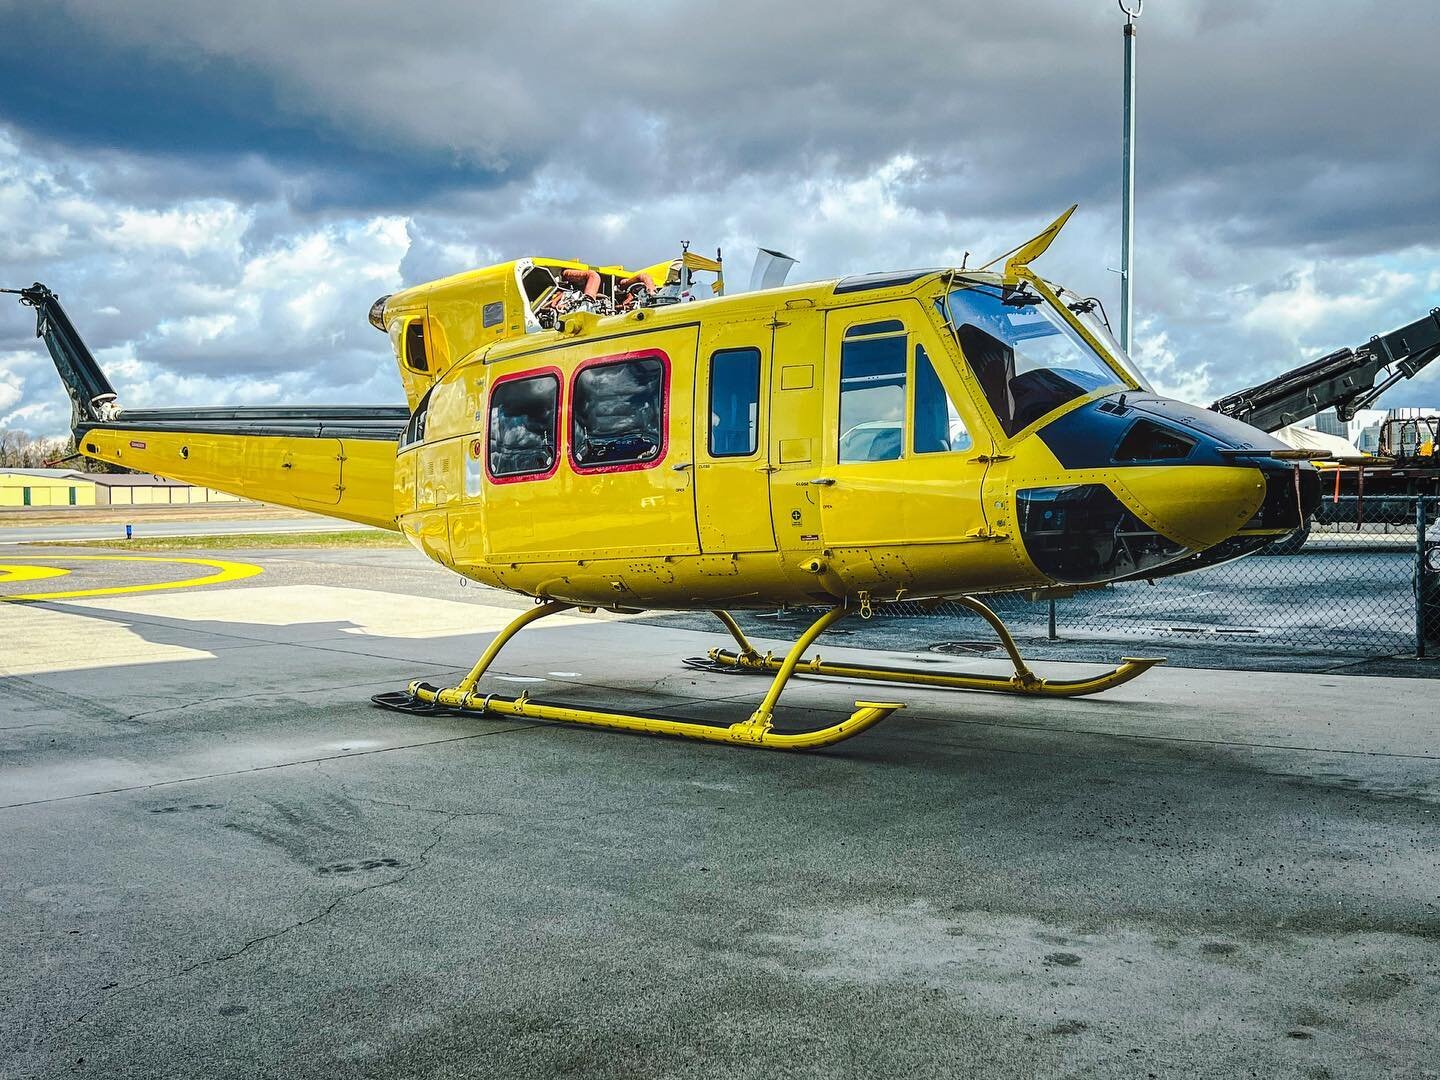 Introducing C-FTJK Bell 412 SP BLR, new to the fleet for the 2023 fire season 🔥

As our helicopter fleet is expanding, so is our team! TRK will be operating 7 mediums this summer and we are now hiring for various pilot and AME positions for the 2023